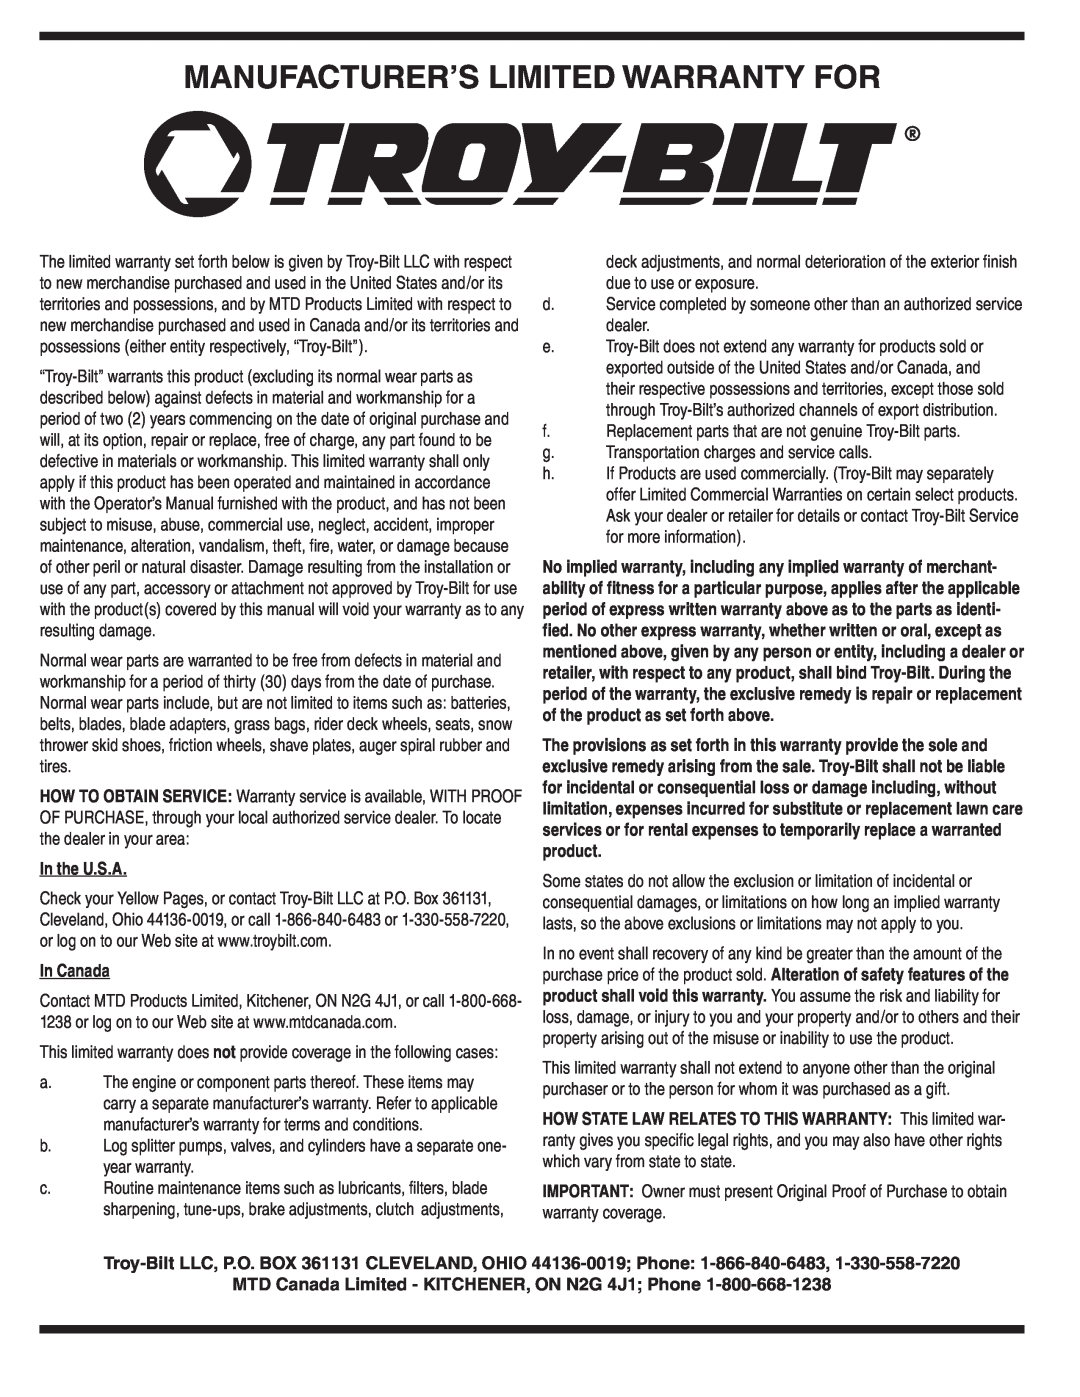 Troy-Bilt 31AH9Q77766 warranty Manufacturer’S Limited Warranty For, In the U.S.A, In Canada 